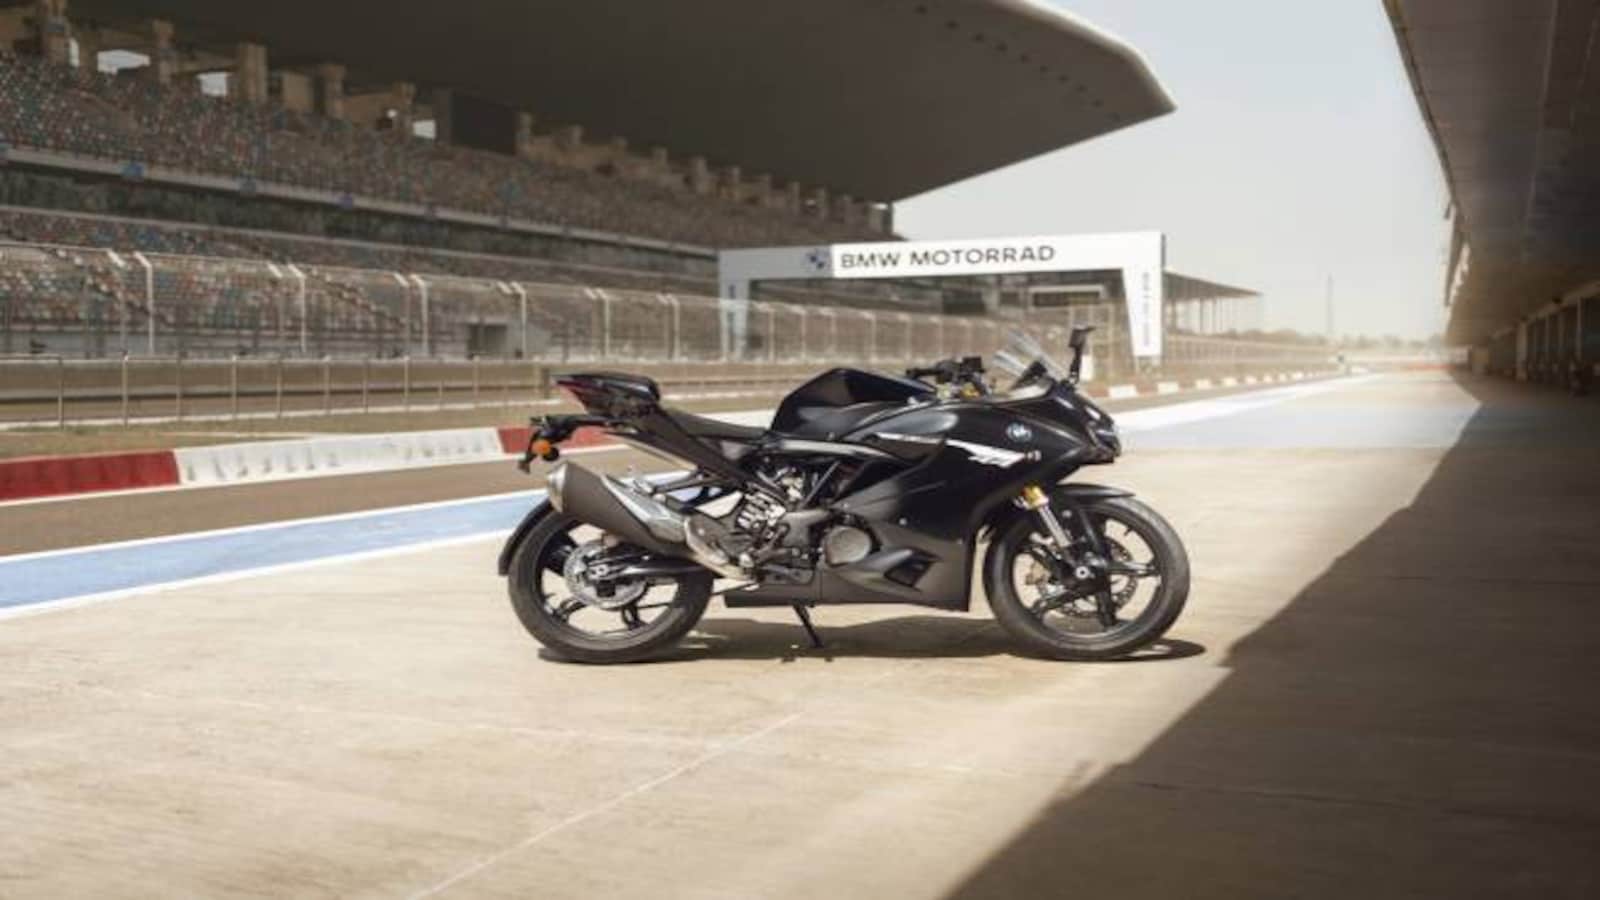 BMW G 310 RR and Apache RR 310 are virtually indistinguishable